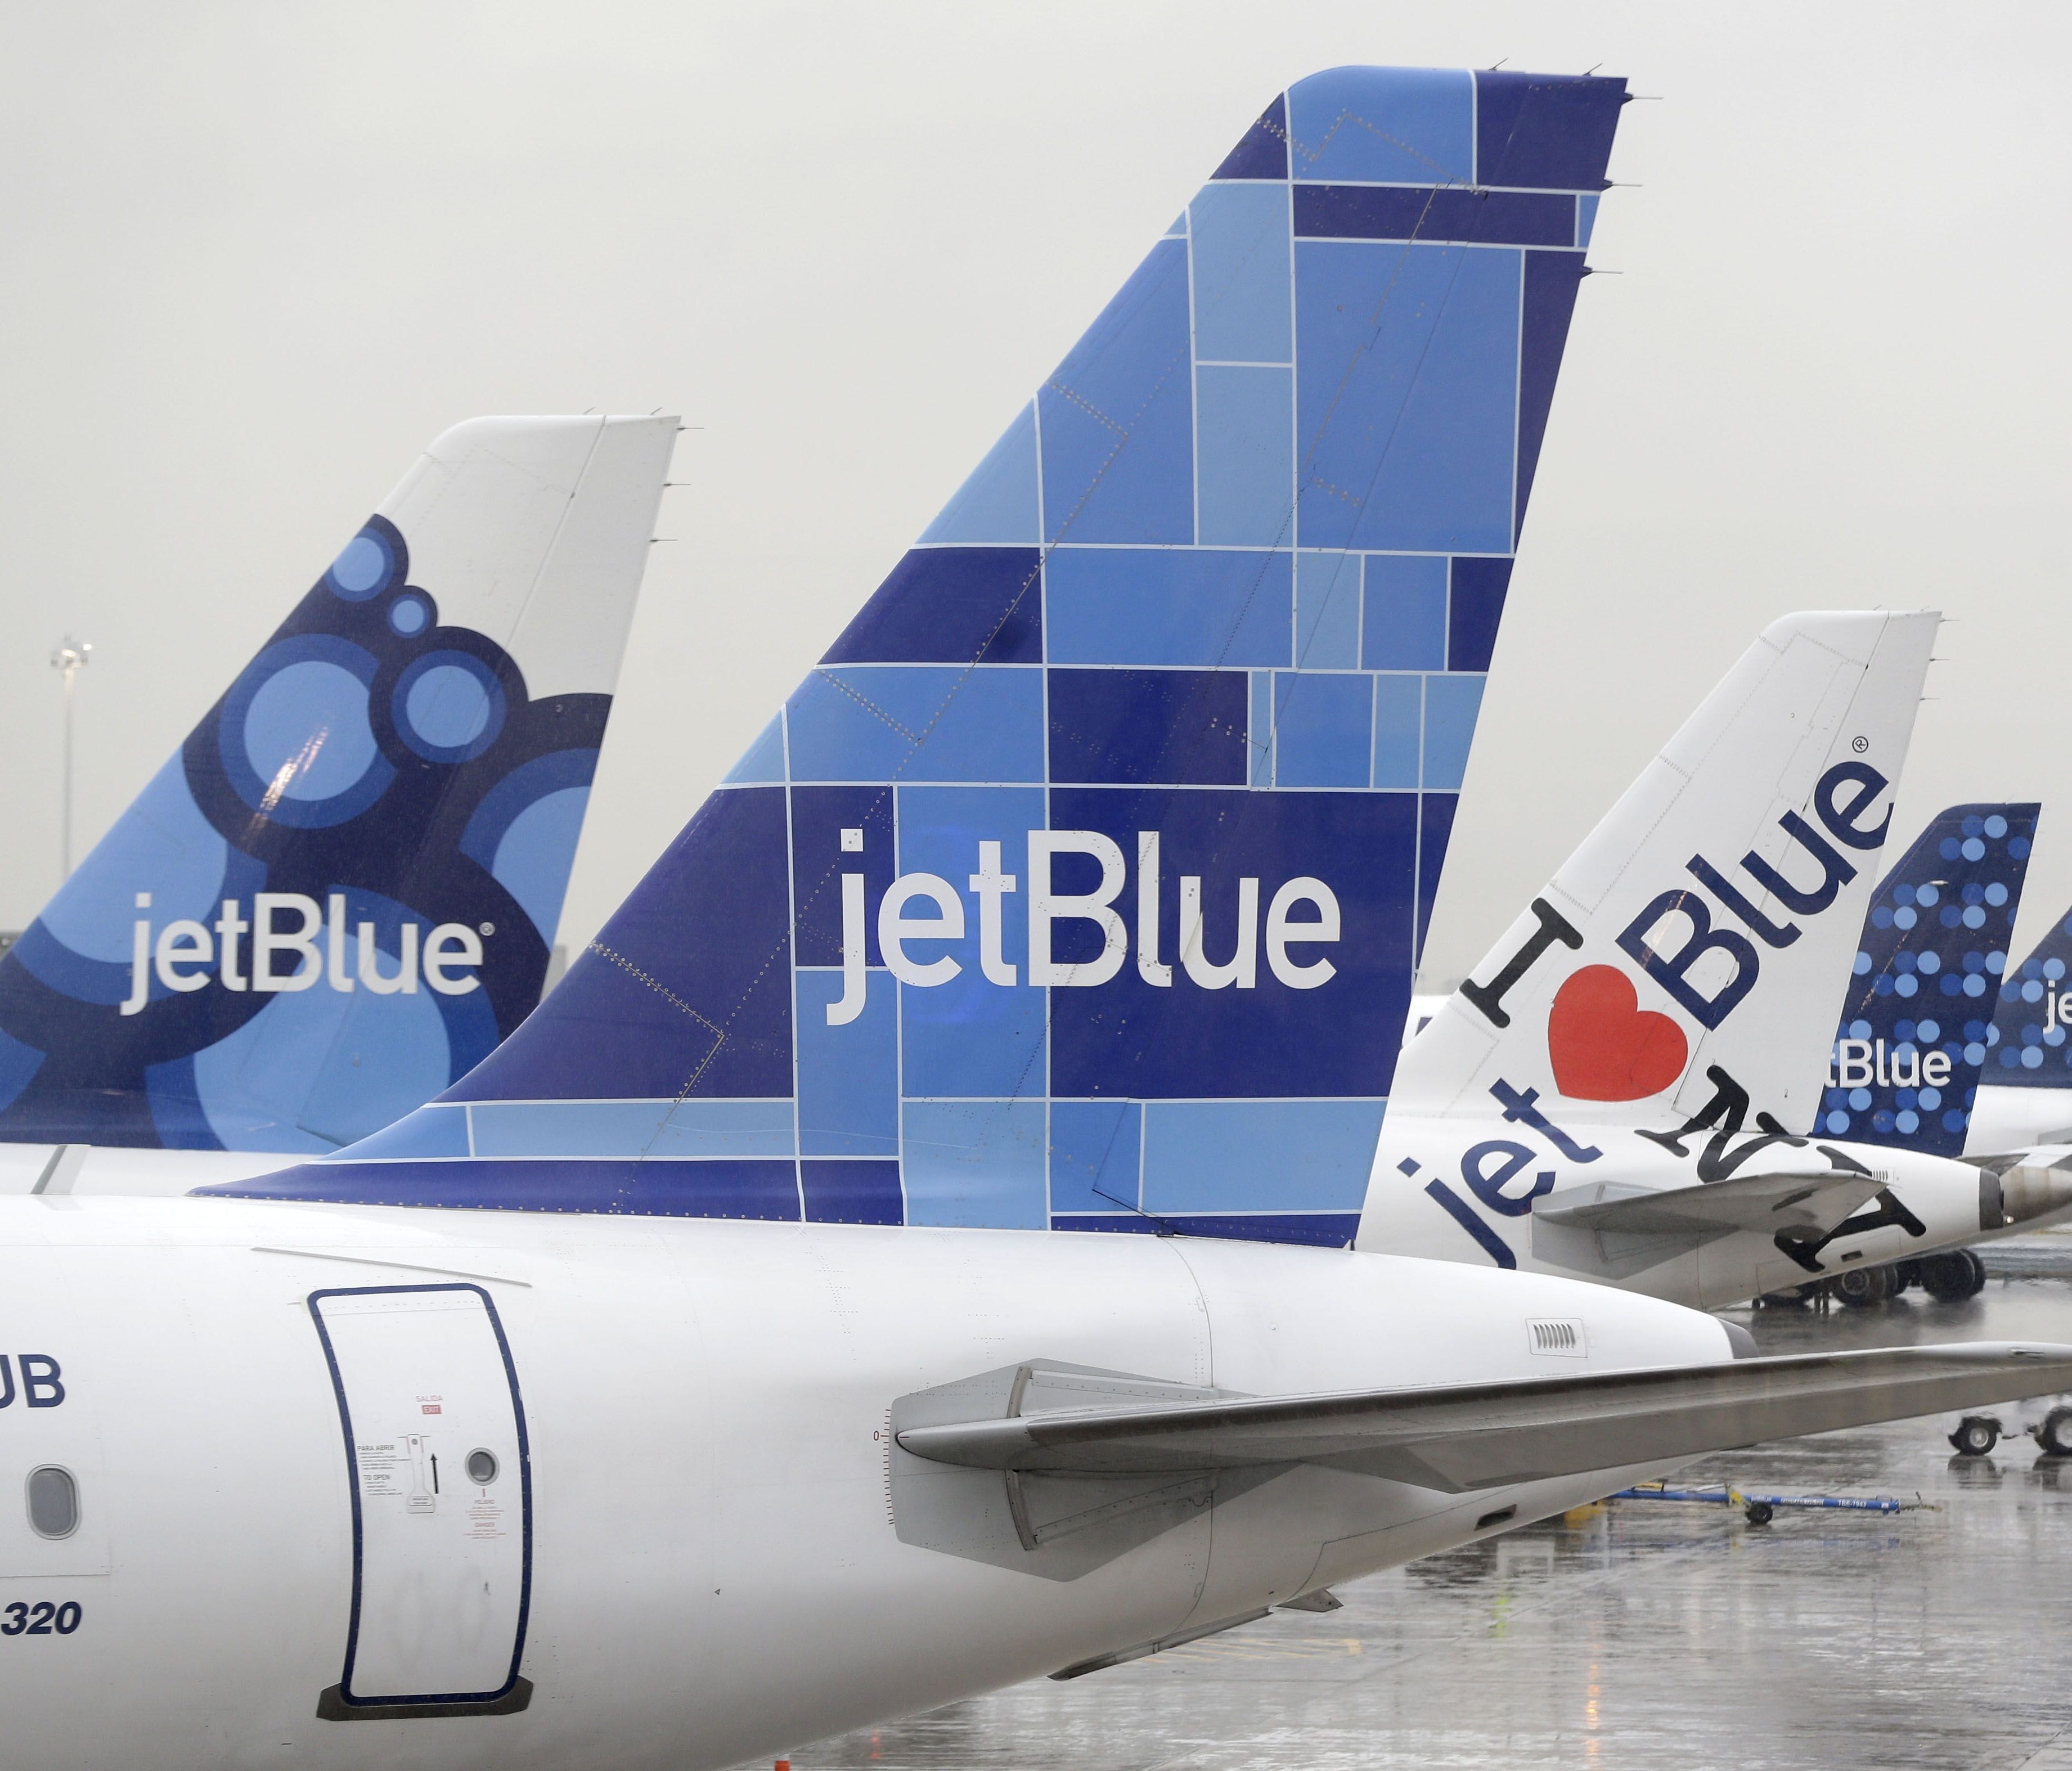 JetBlue airplanes at their gates at John F. Kennedy Airport in New York CIty.